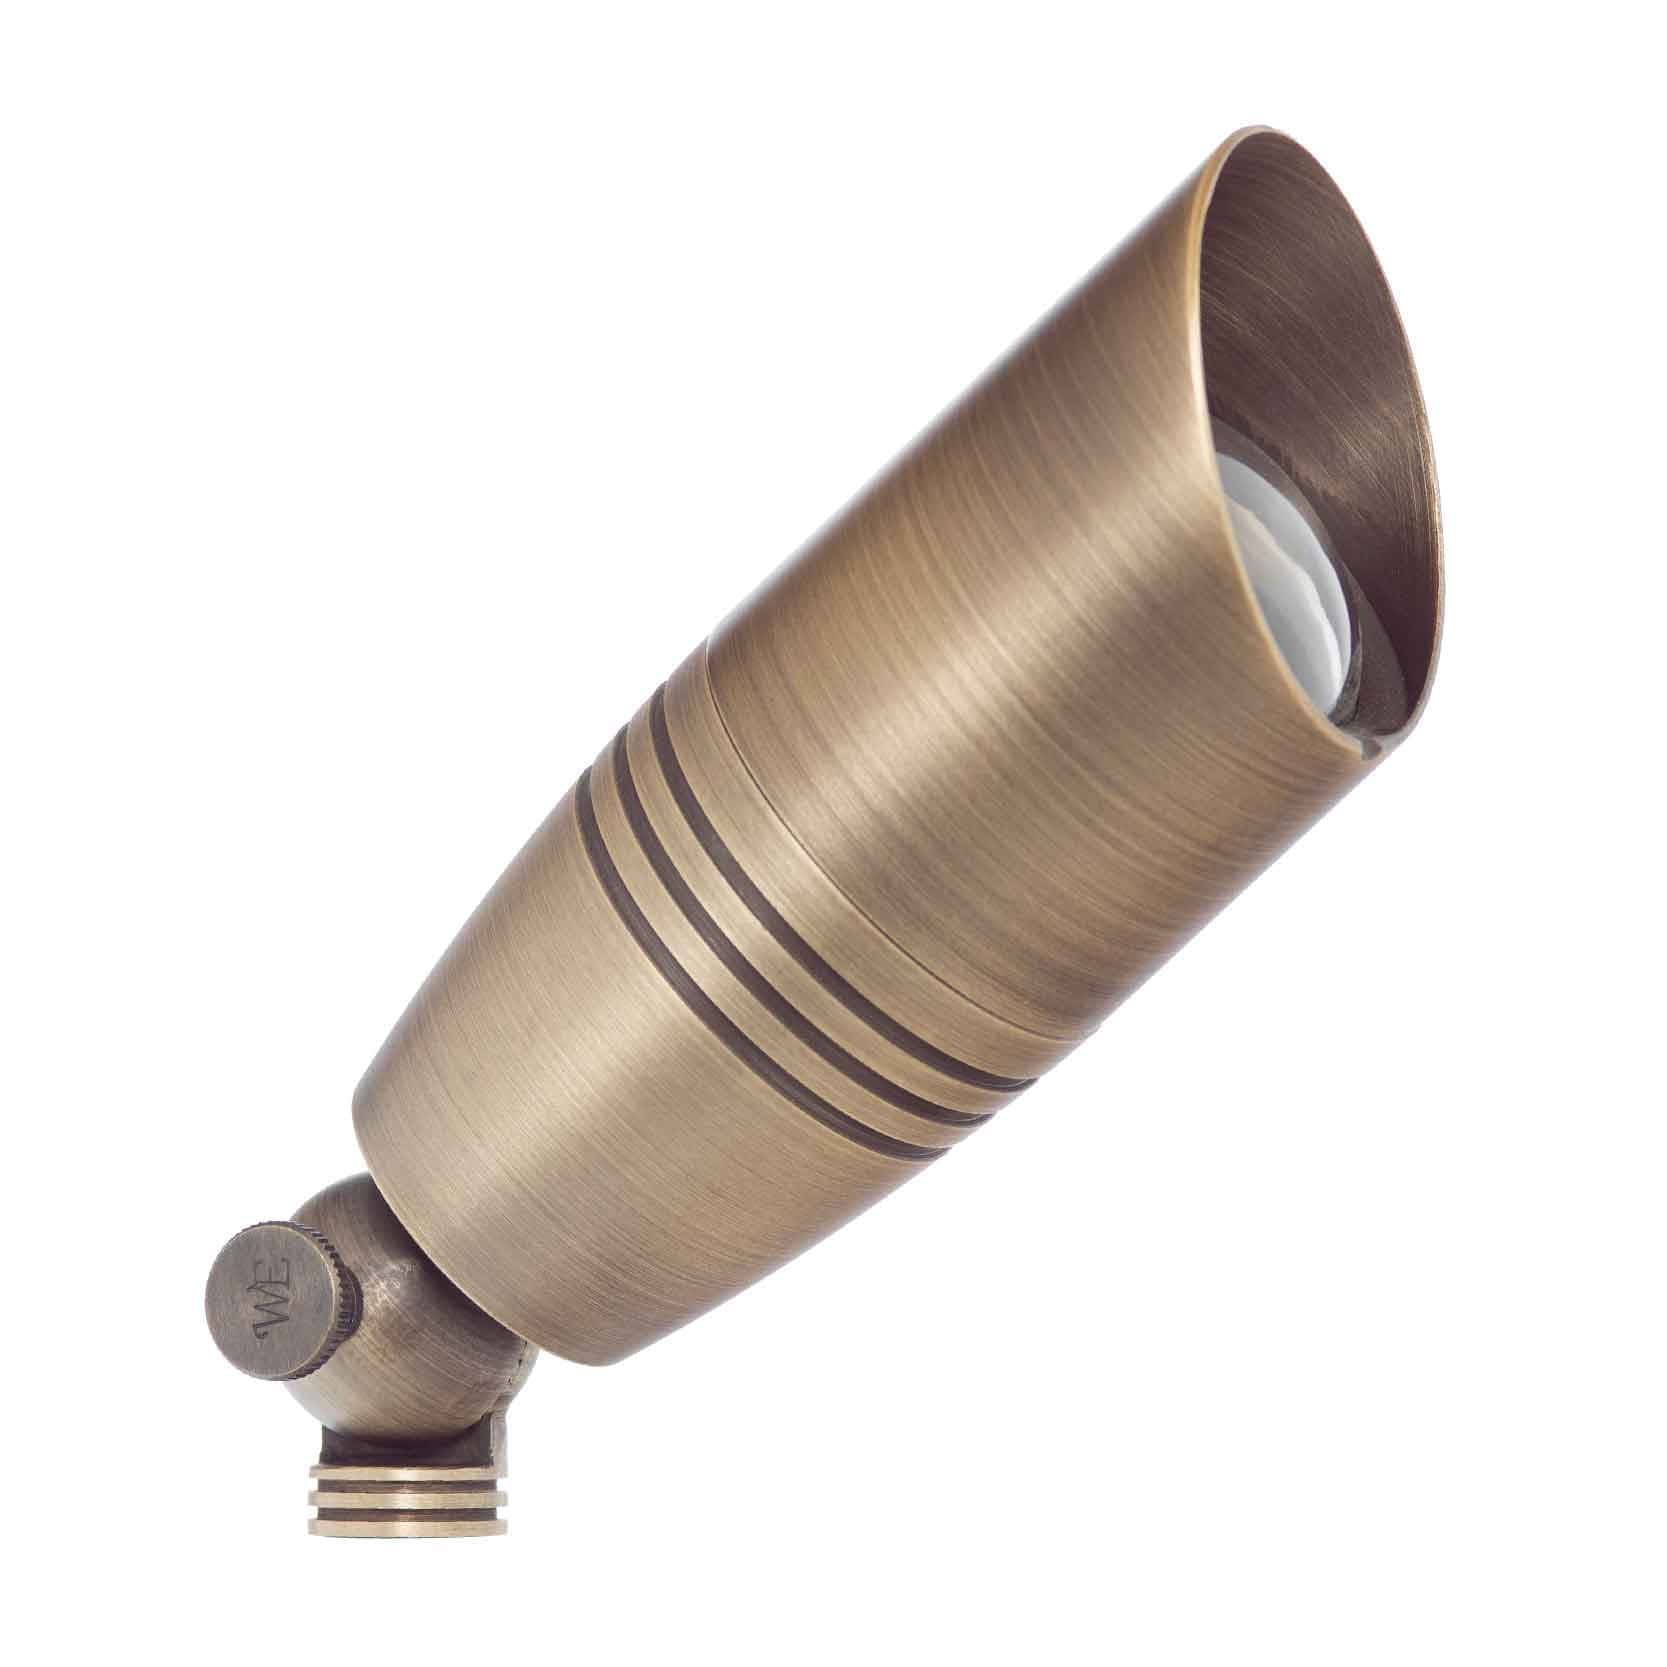 Cast Brass Architectural LED Spot Light - 5W, 3000K MR16 Lamp Included - Sonic Electric